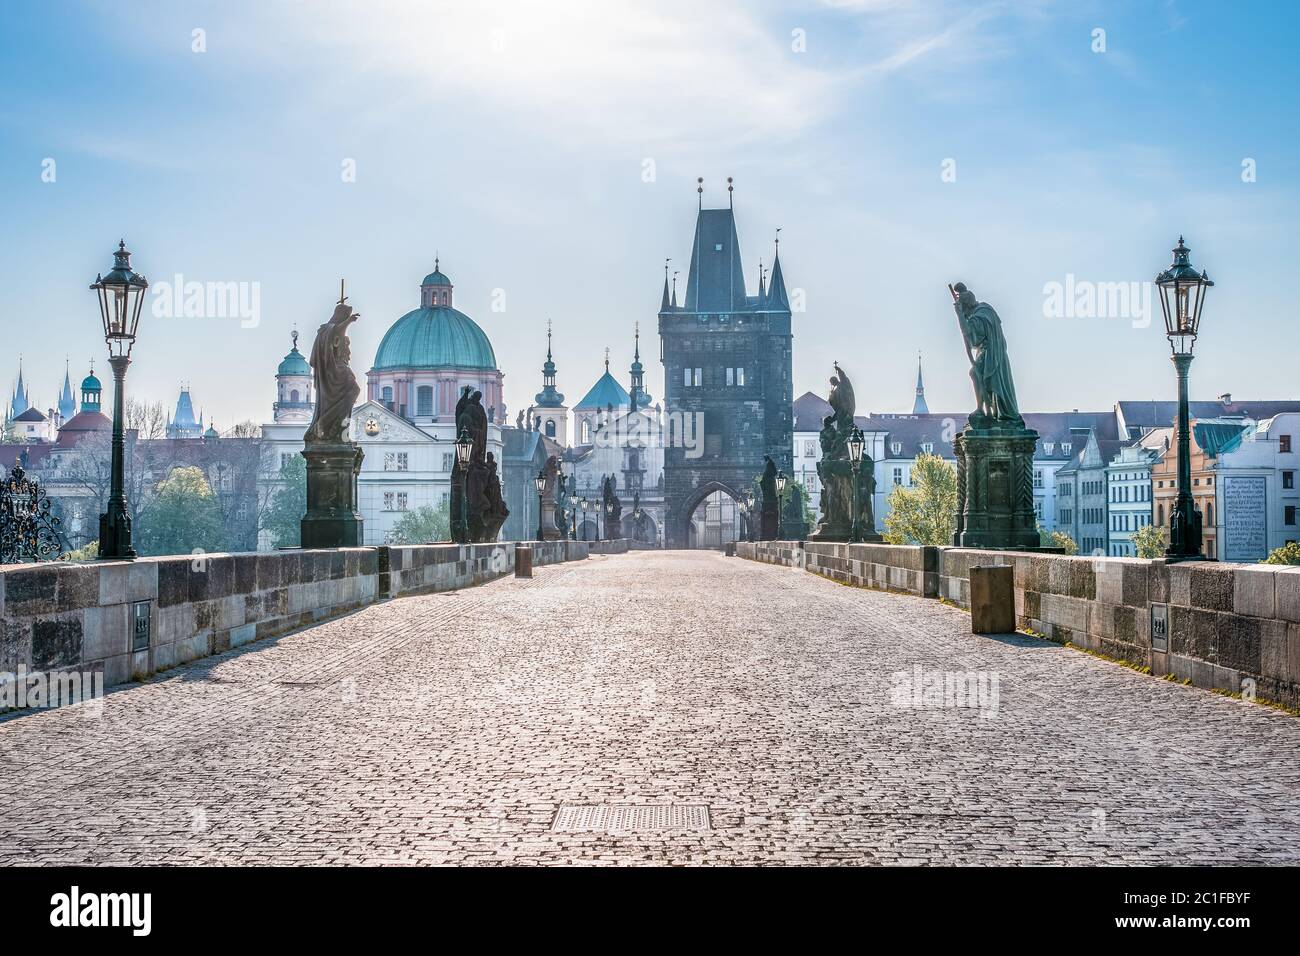 Due to the coronavirus outbreak the city center of Prague is virtually deserted. It is possible to find empty spaces even on famous landmarks. This ph Stock Photo